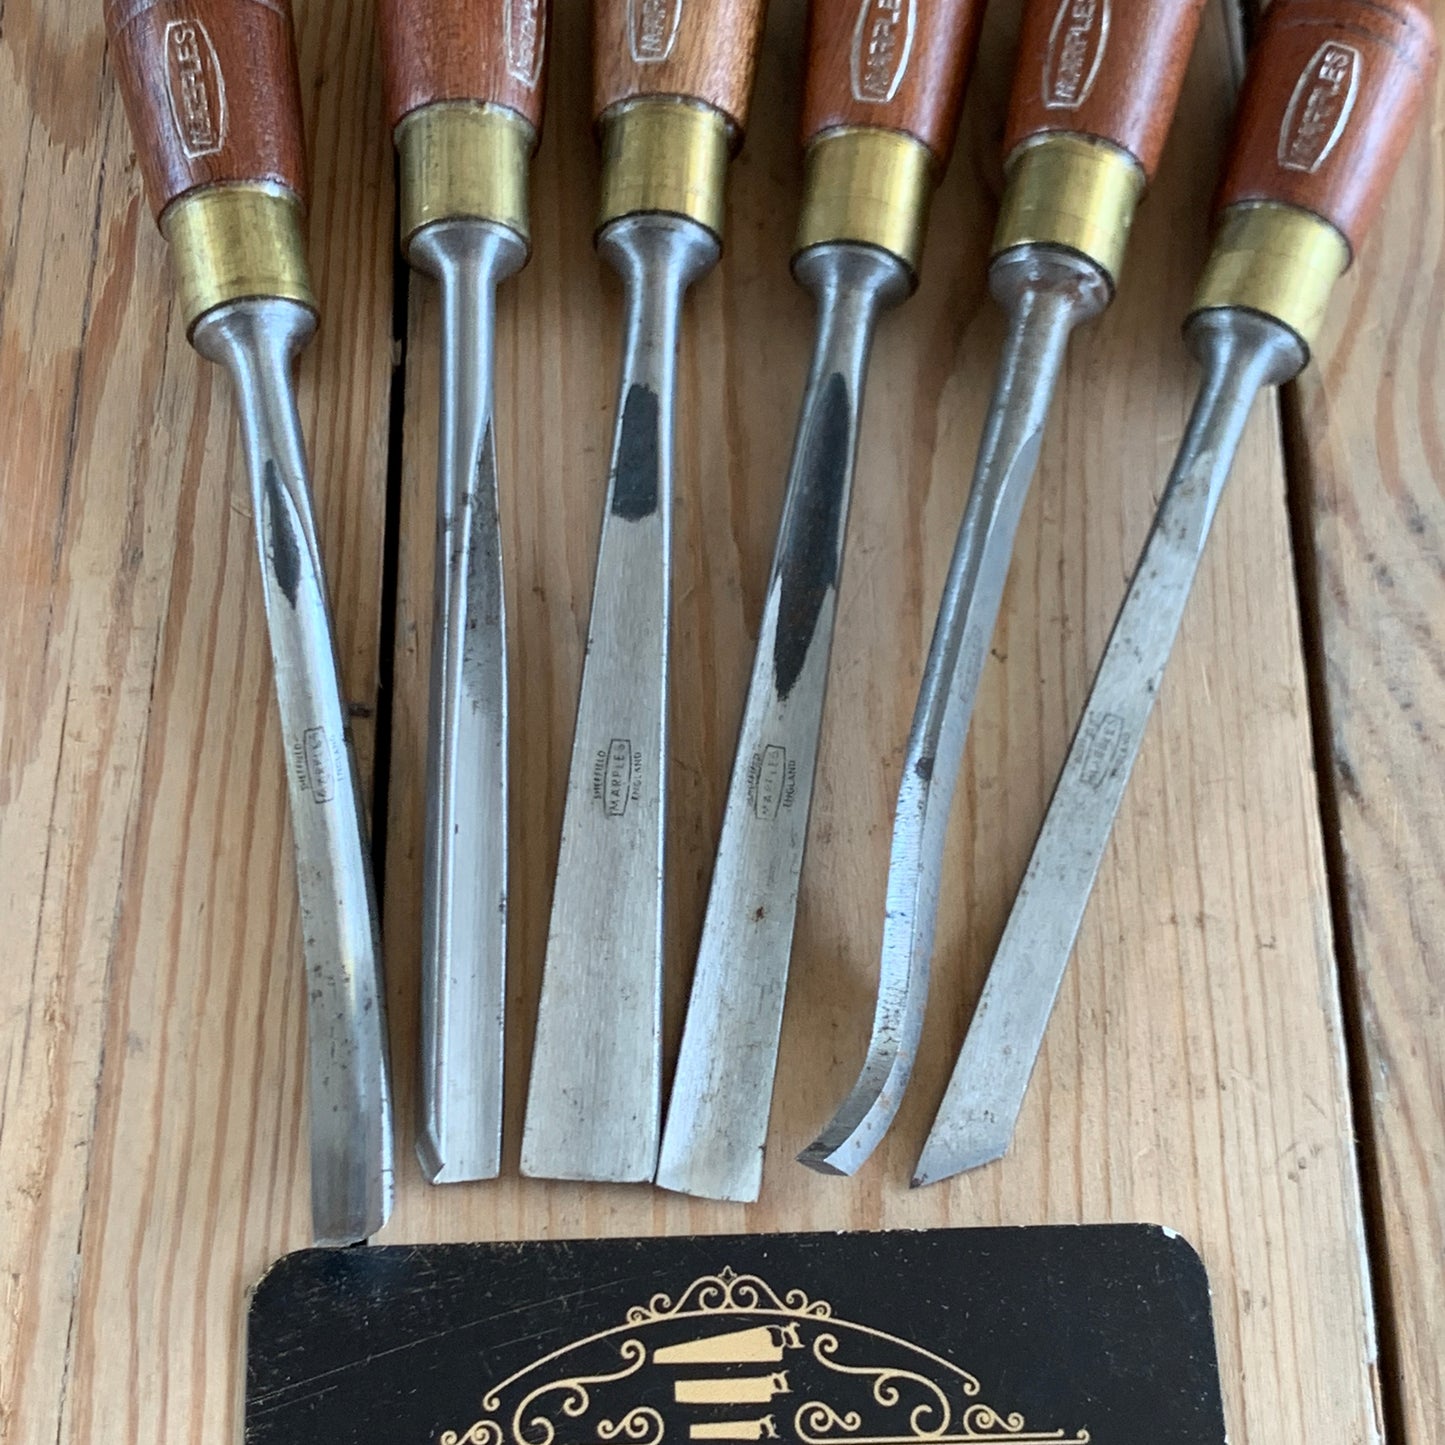 SOLD Vintage set of 6 RECORD MARPLES England Carving Tools CHISELS M152 unused in box T9050